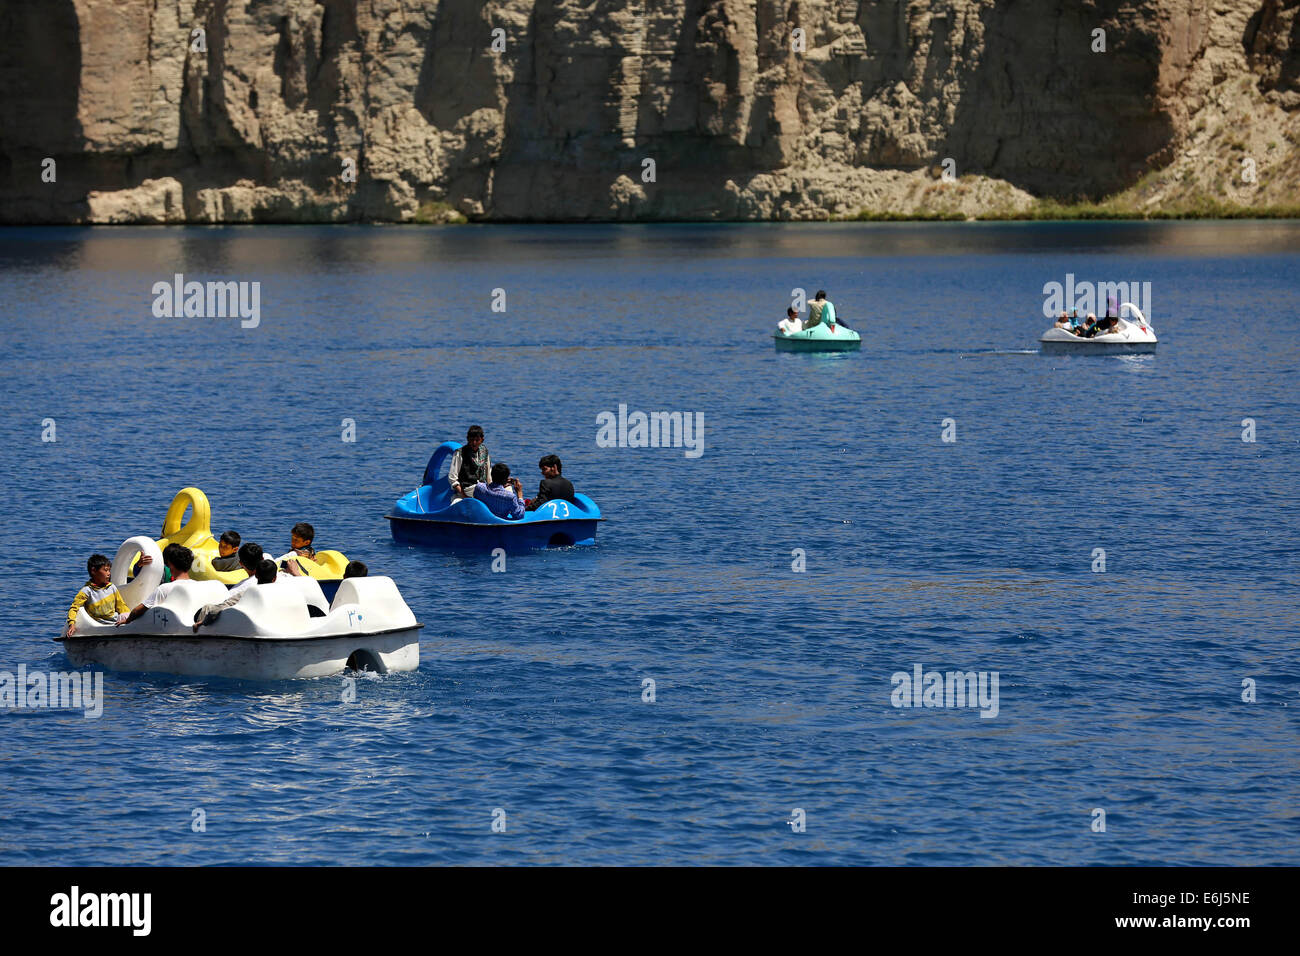 (140825) -- BAMYAN, Aug. 25, 2014 (Xinhua) -- Afghans enjoy boating in Band-e-Amir Lake in Bamyan, central Afghanistan, on Aug. 23, 2014. (Xinhua/Kamran) Stock Photo